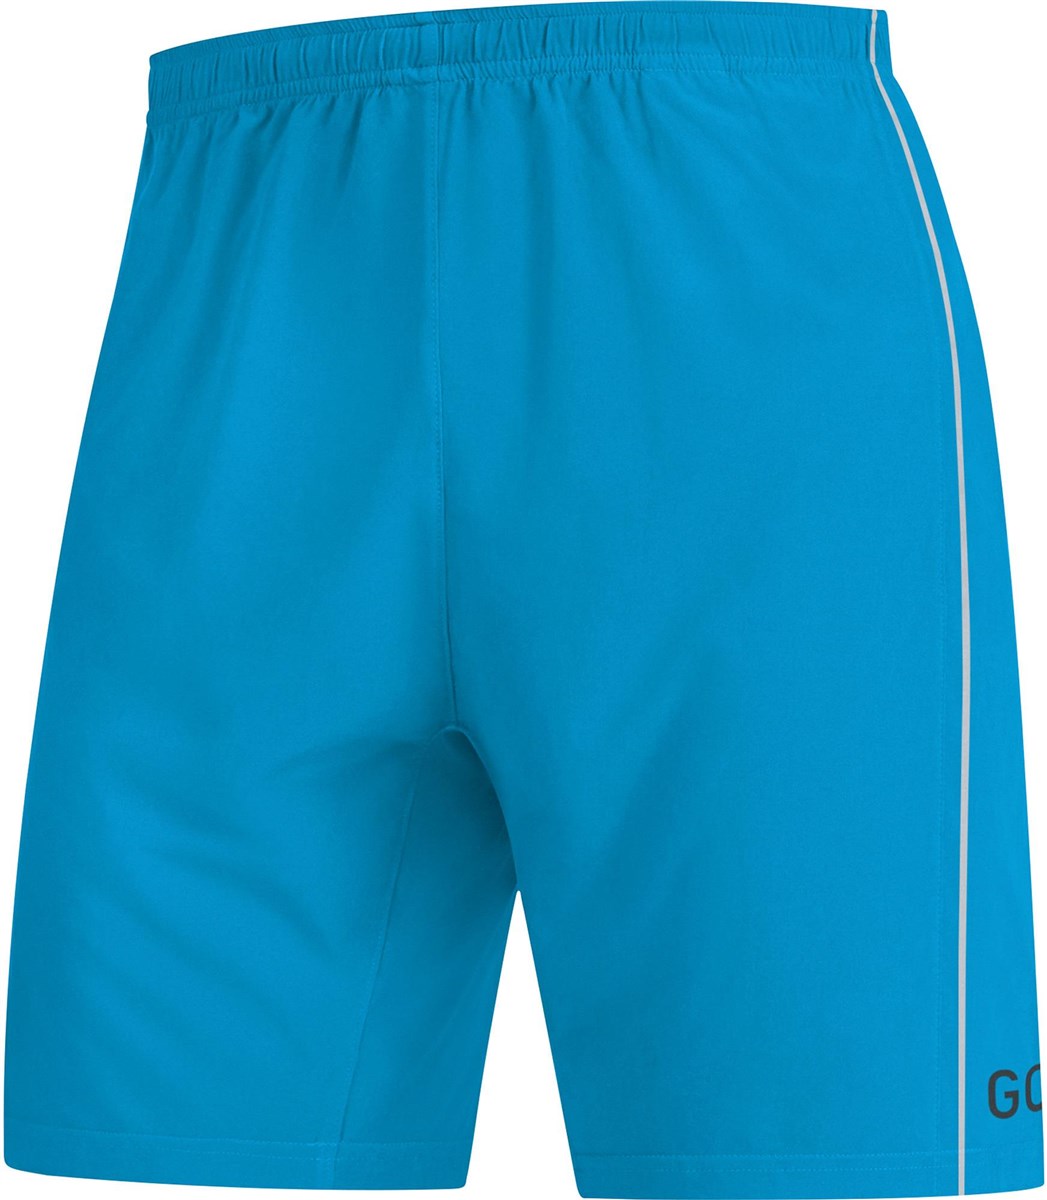 Gore R5 Light Shorts product image